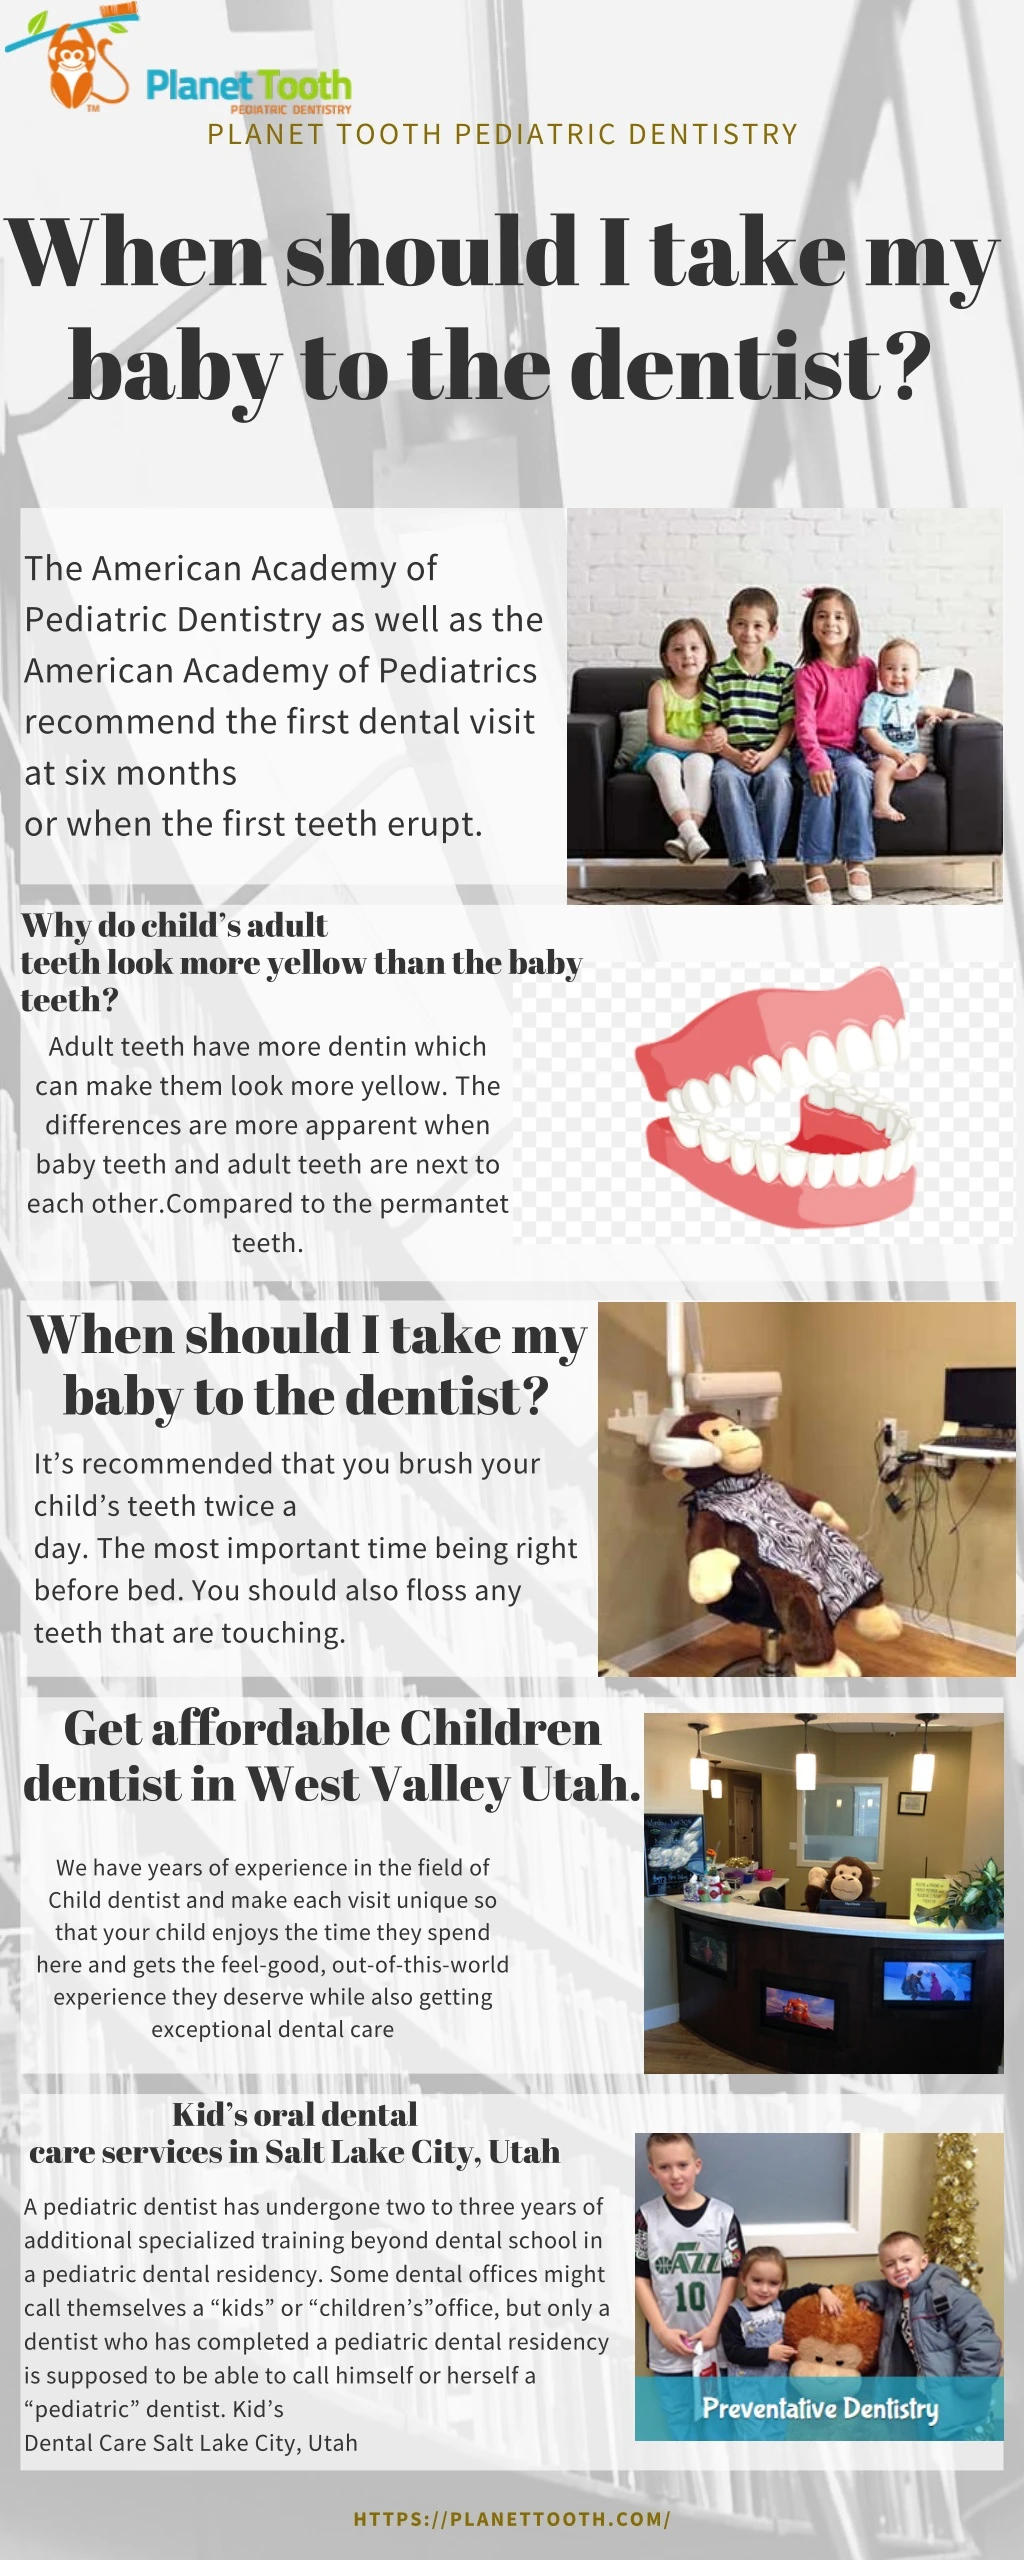 planet tooth pediatric dentistry when should